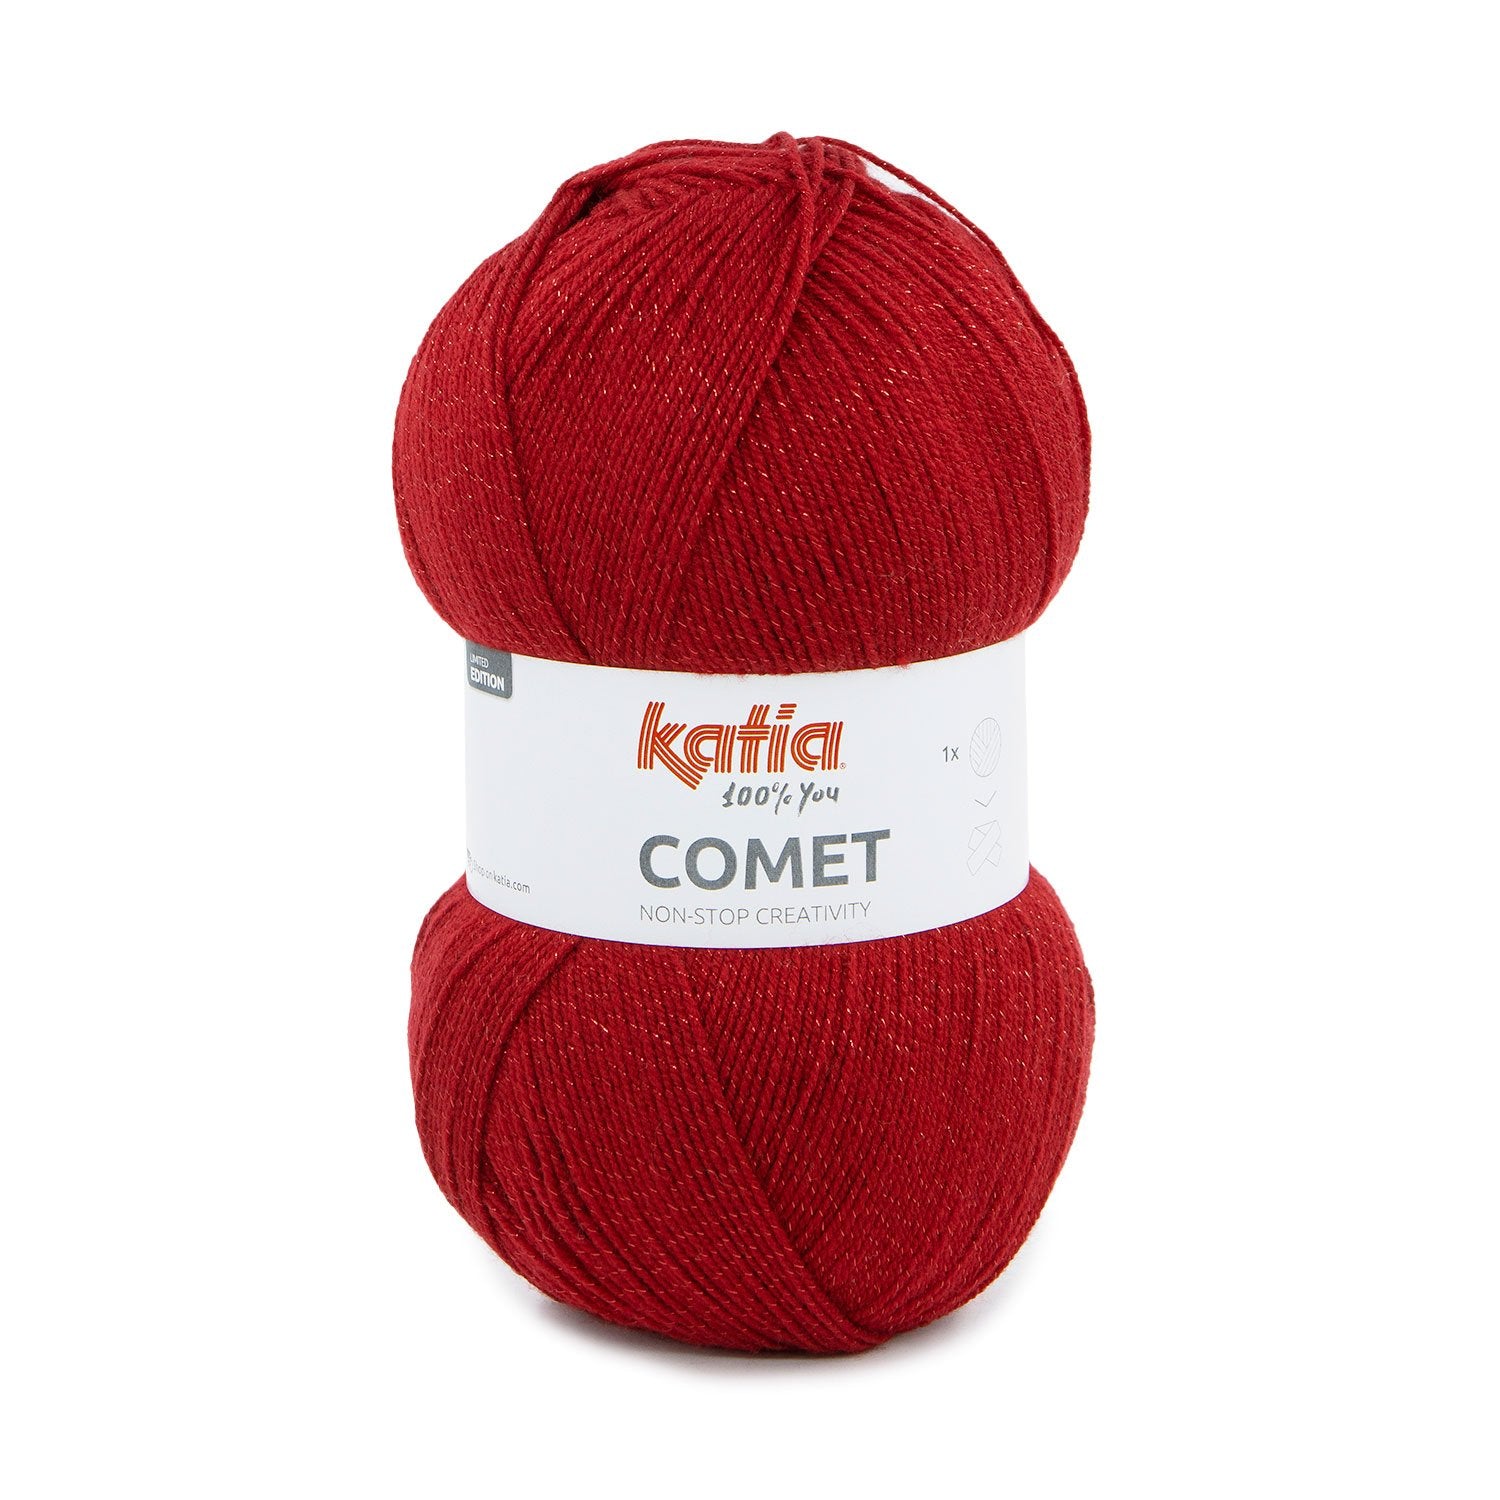 Katia Comet: Brilliance and sophistication in every stitch